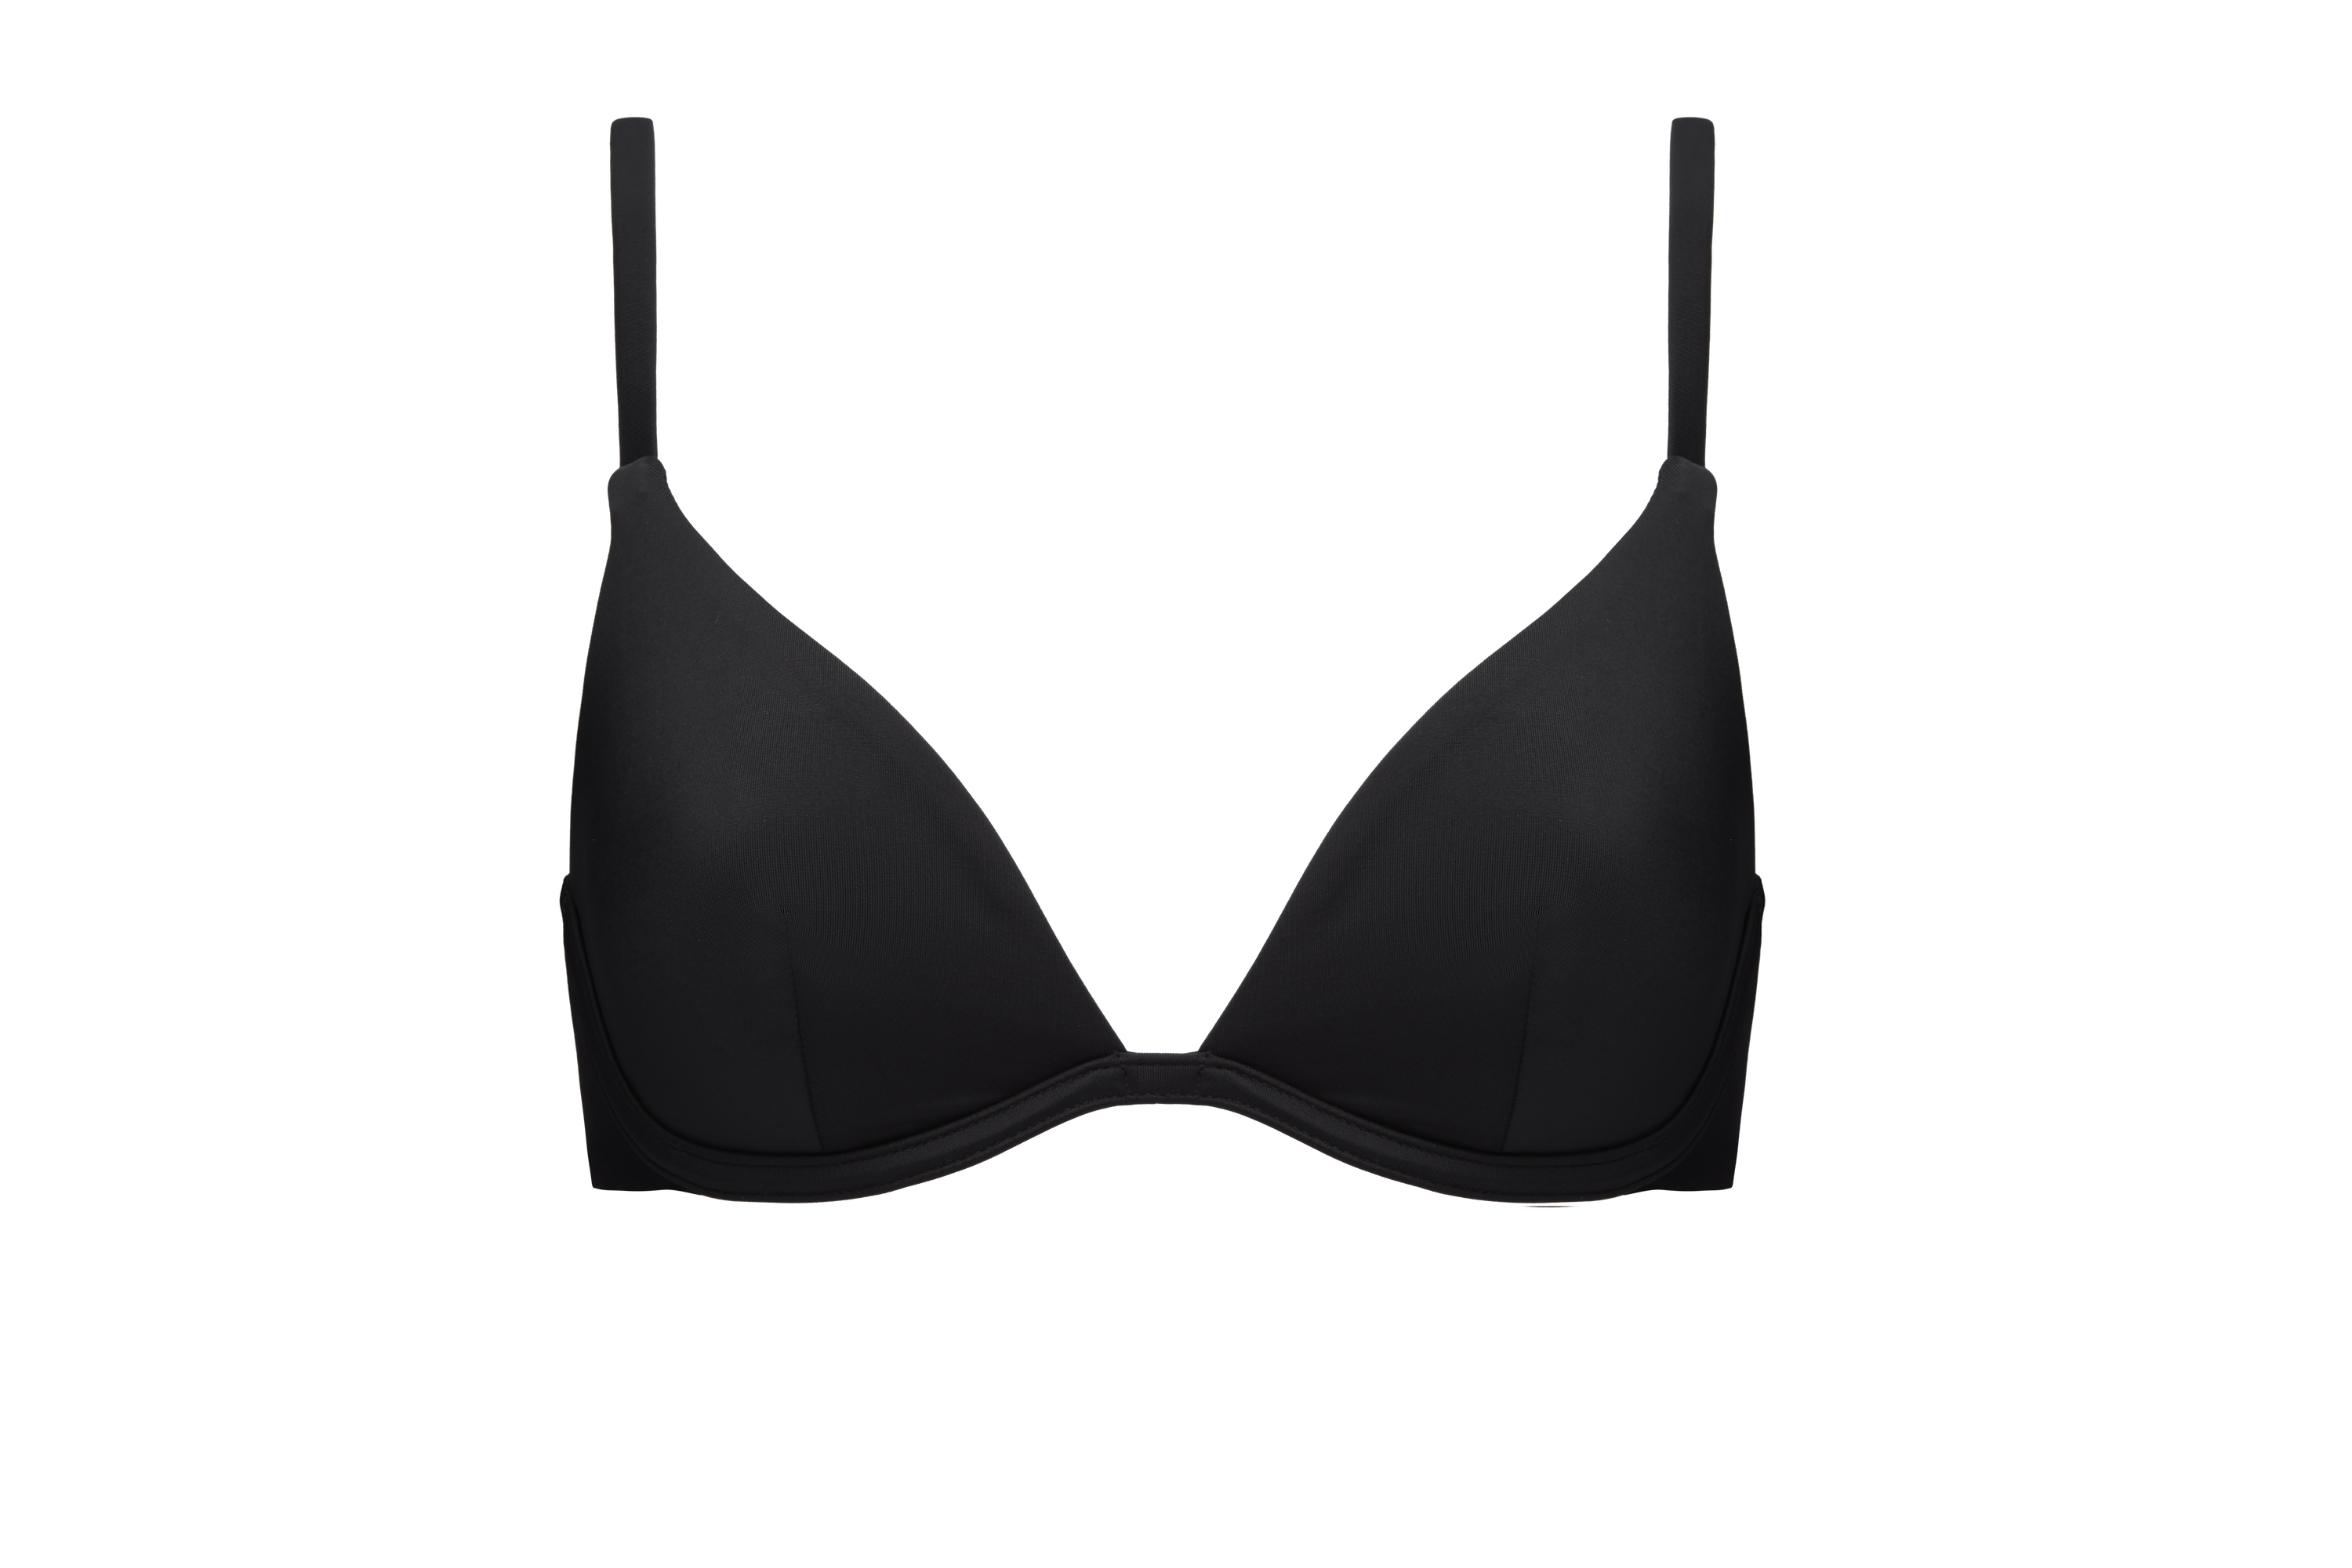 CUUP on X: CUUPSwim: Meet The Plunge. Our most minimal swim silhouette  that is as supportive as your favorite CUUP bra. Pared down and easy to  wear, The Plunge is our perfect